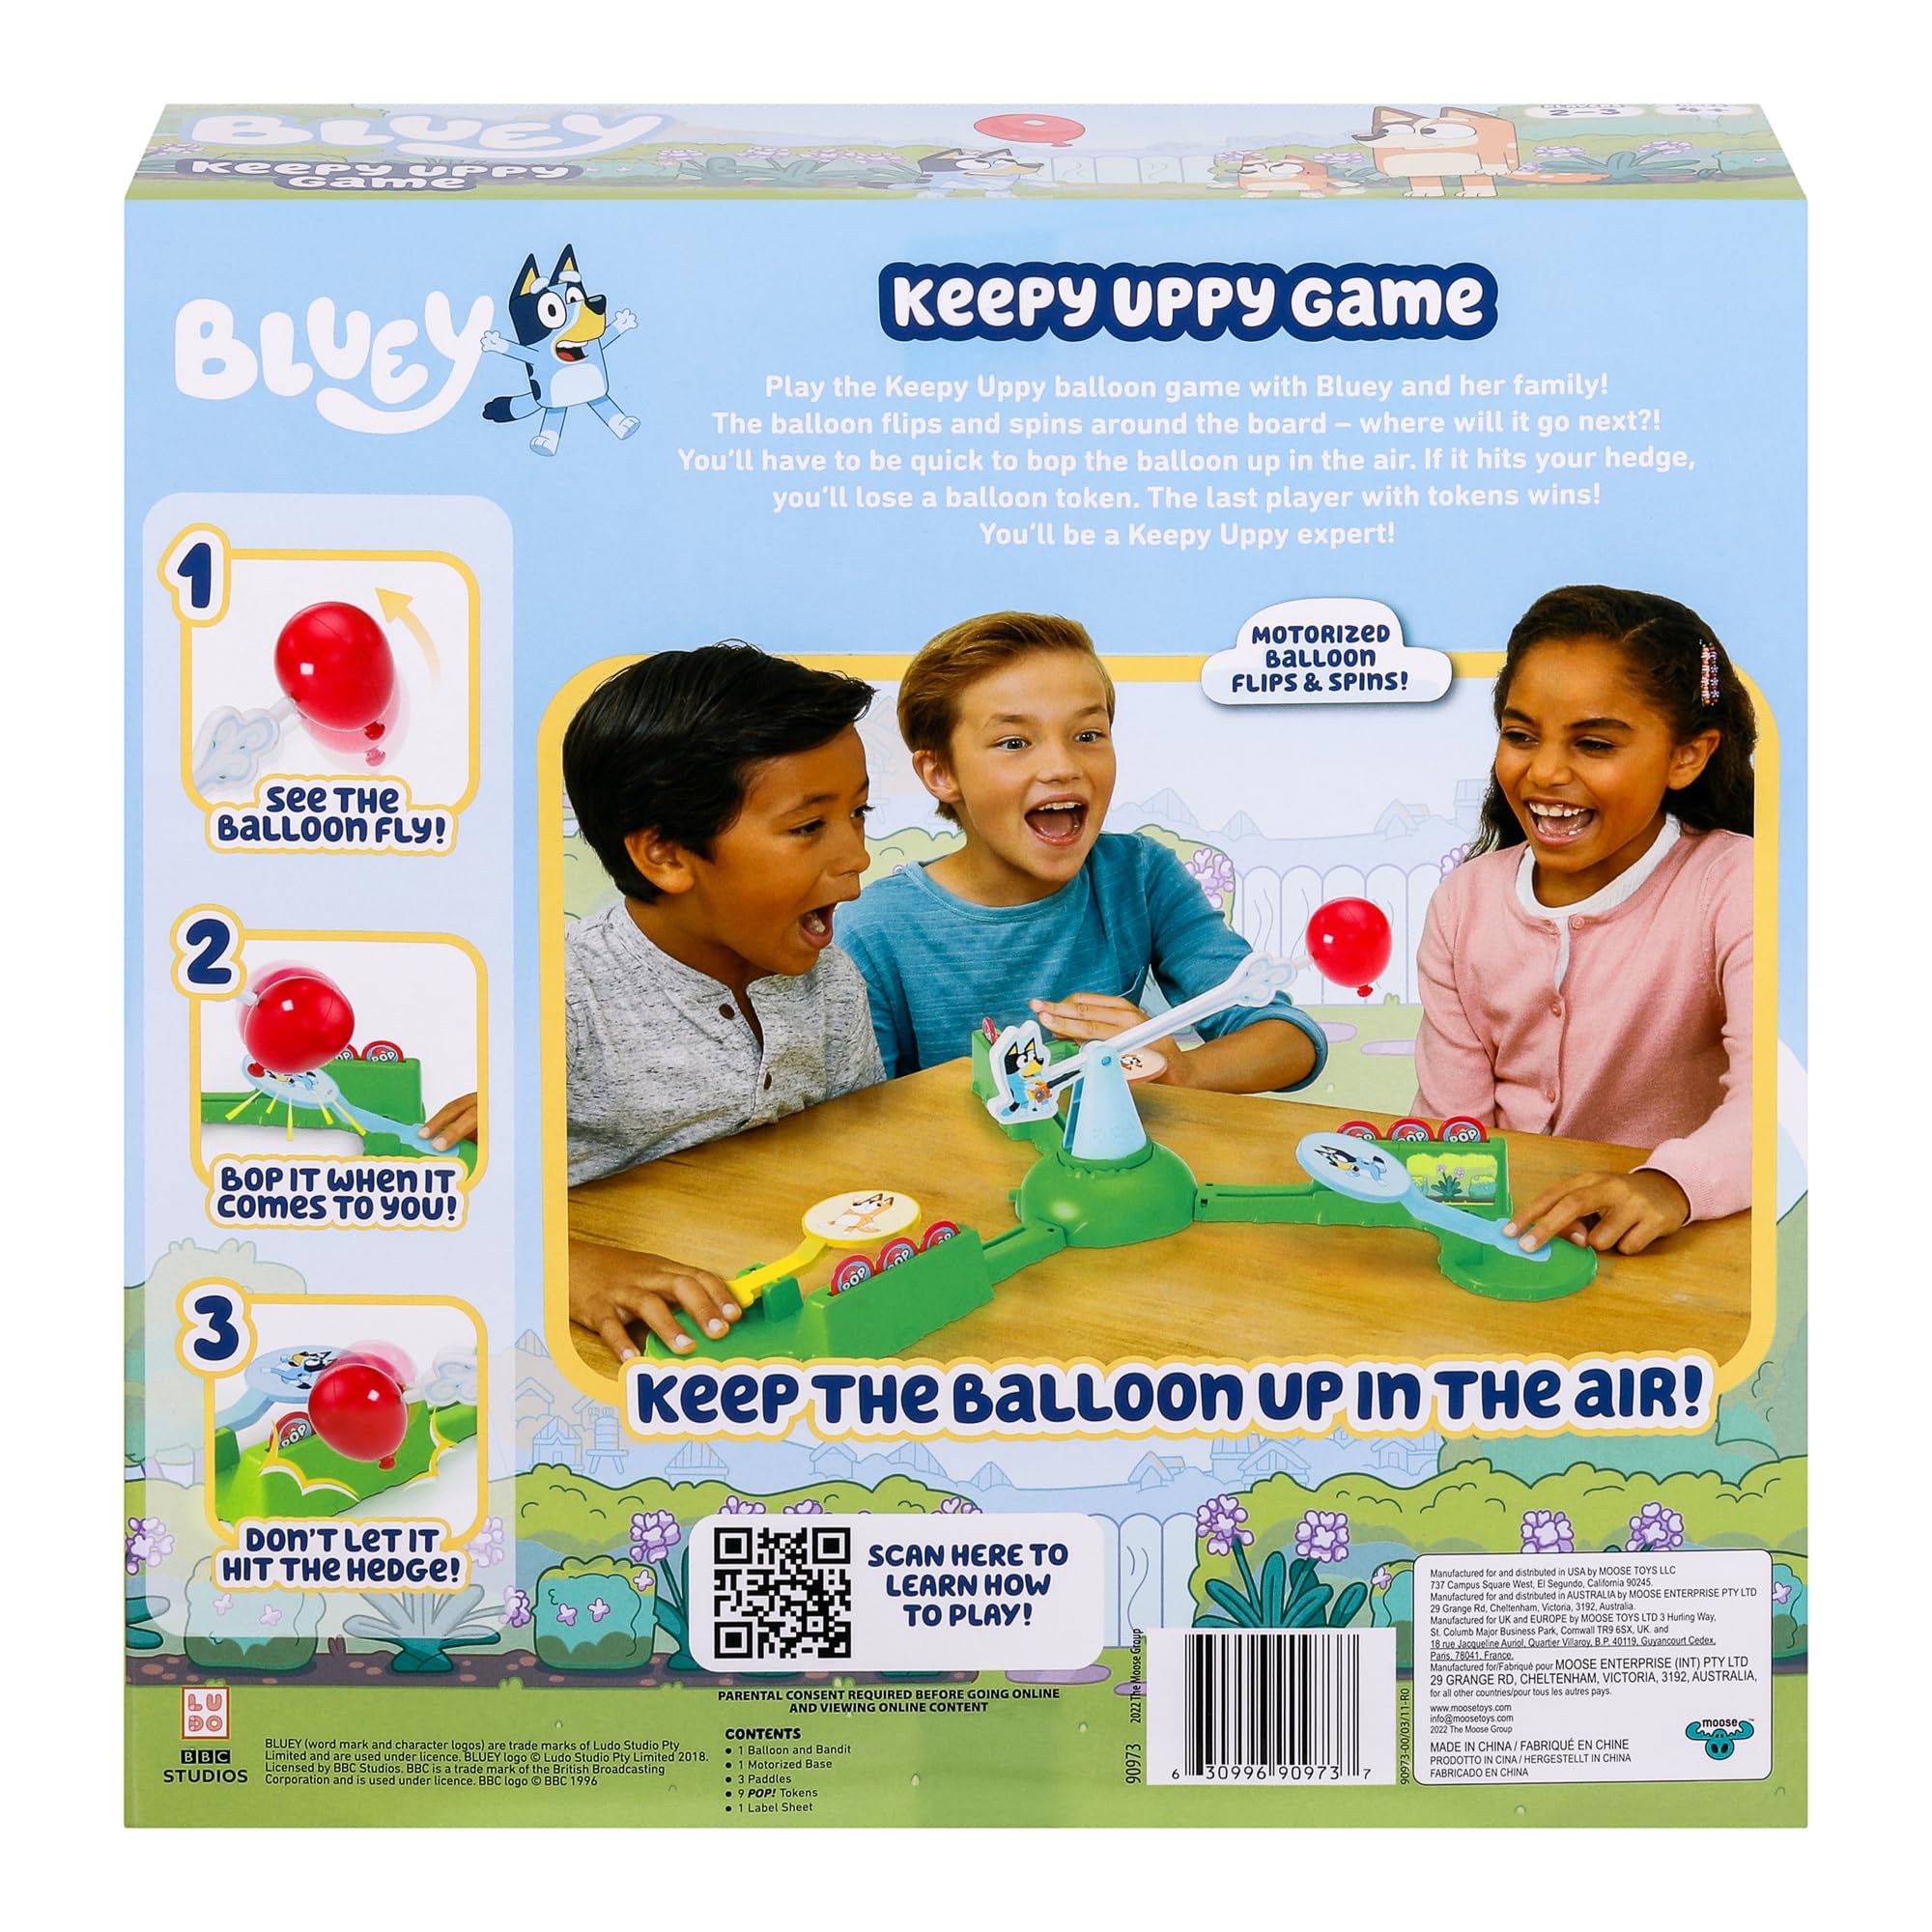 Bluey Keepy Uppy Game. Help, Bingo, and Chilli Keep The Motorized Balloon in The Air with The Character Paddles for 2-3 Players. Ages 4+